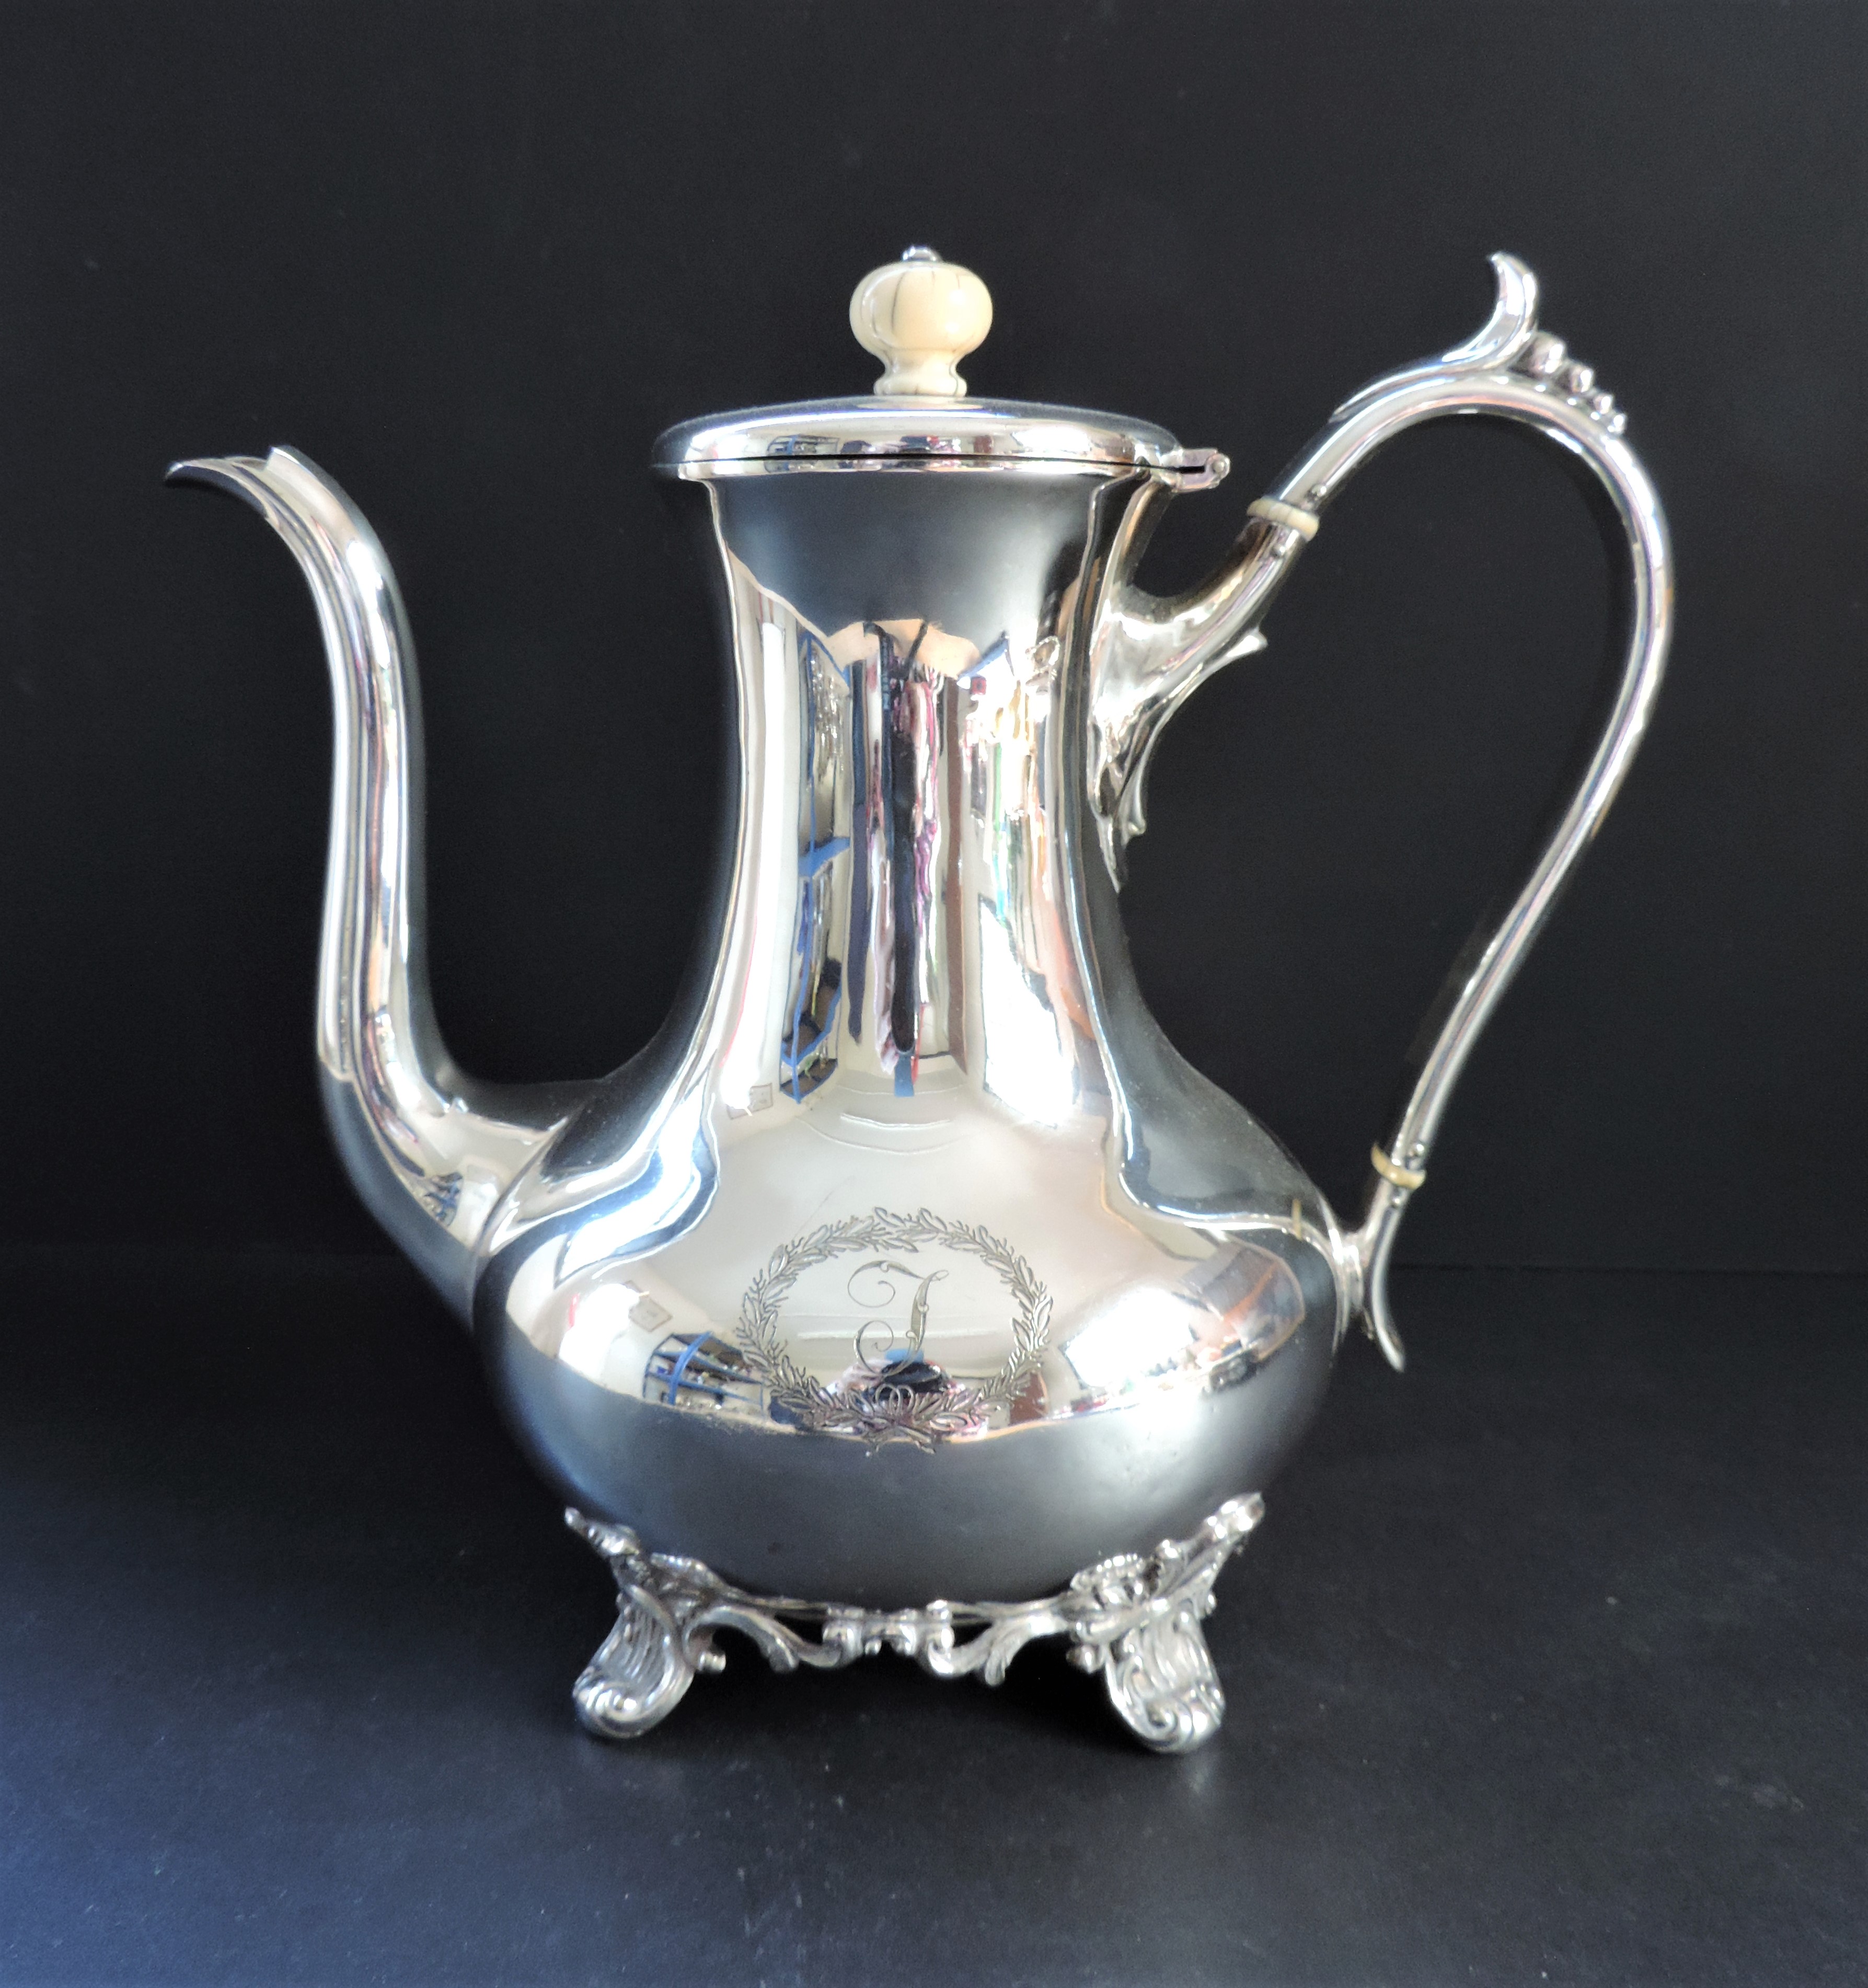 Antique Georgian Style Silver Plated Coffee Pot circa 1870's - Image 2 of 5